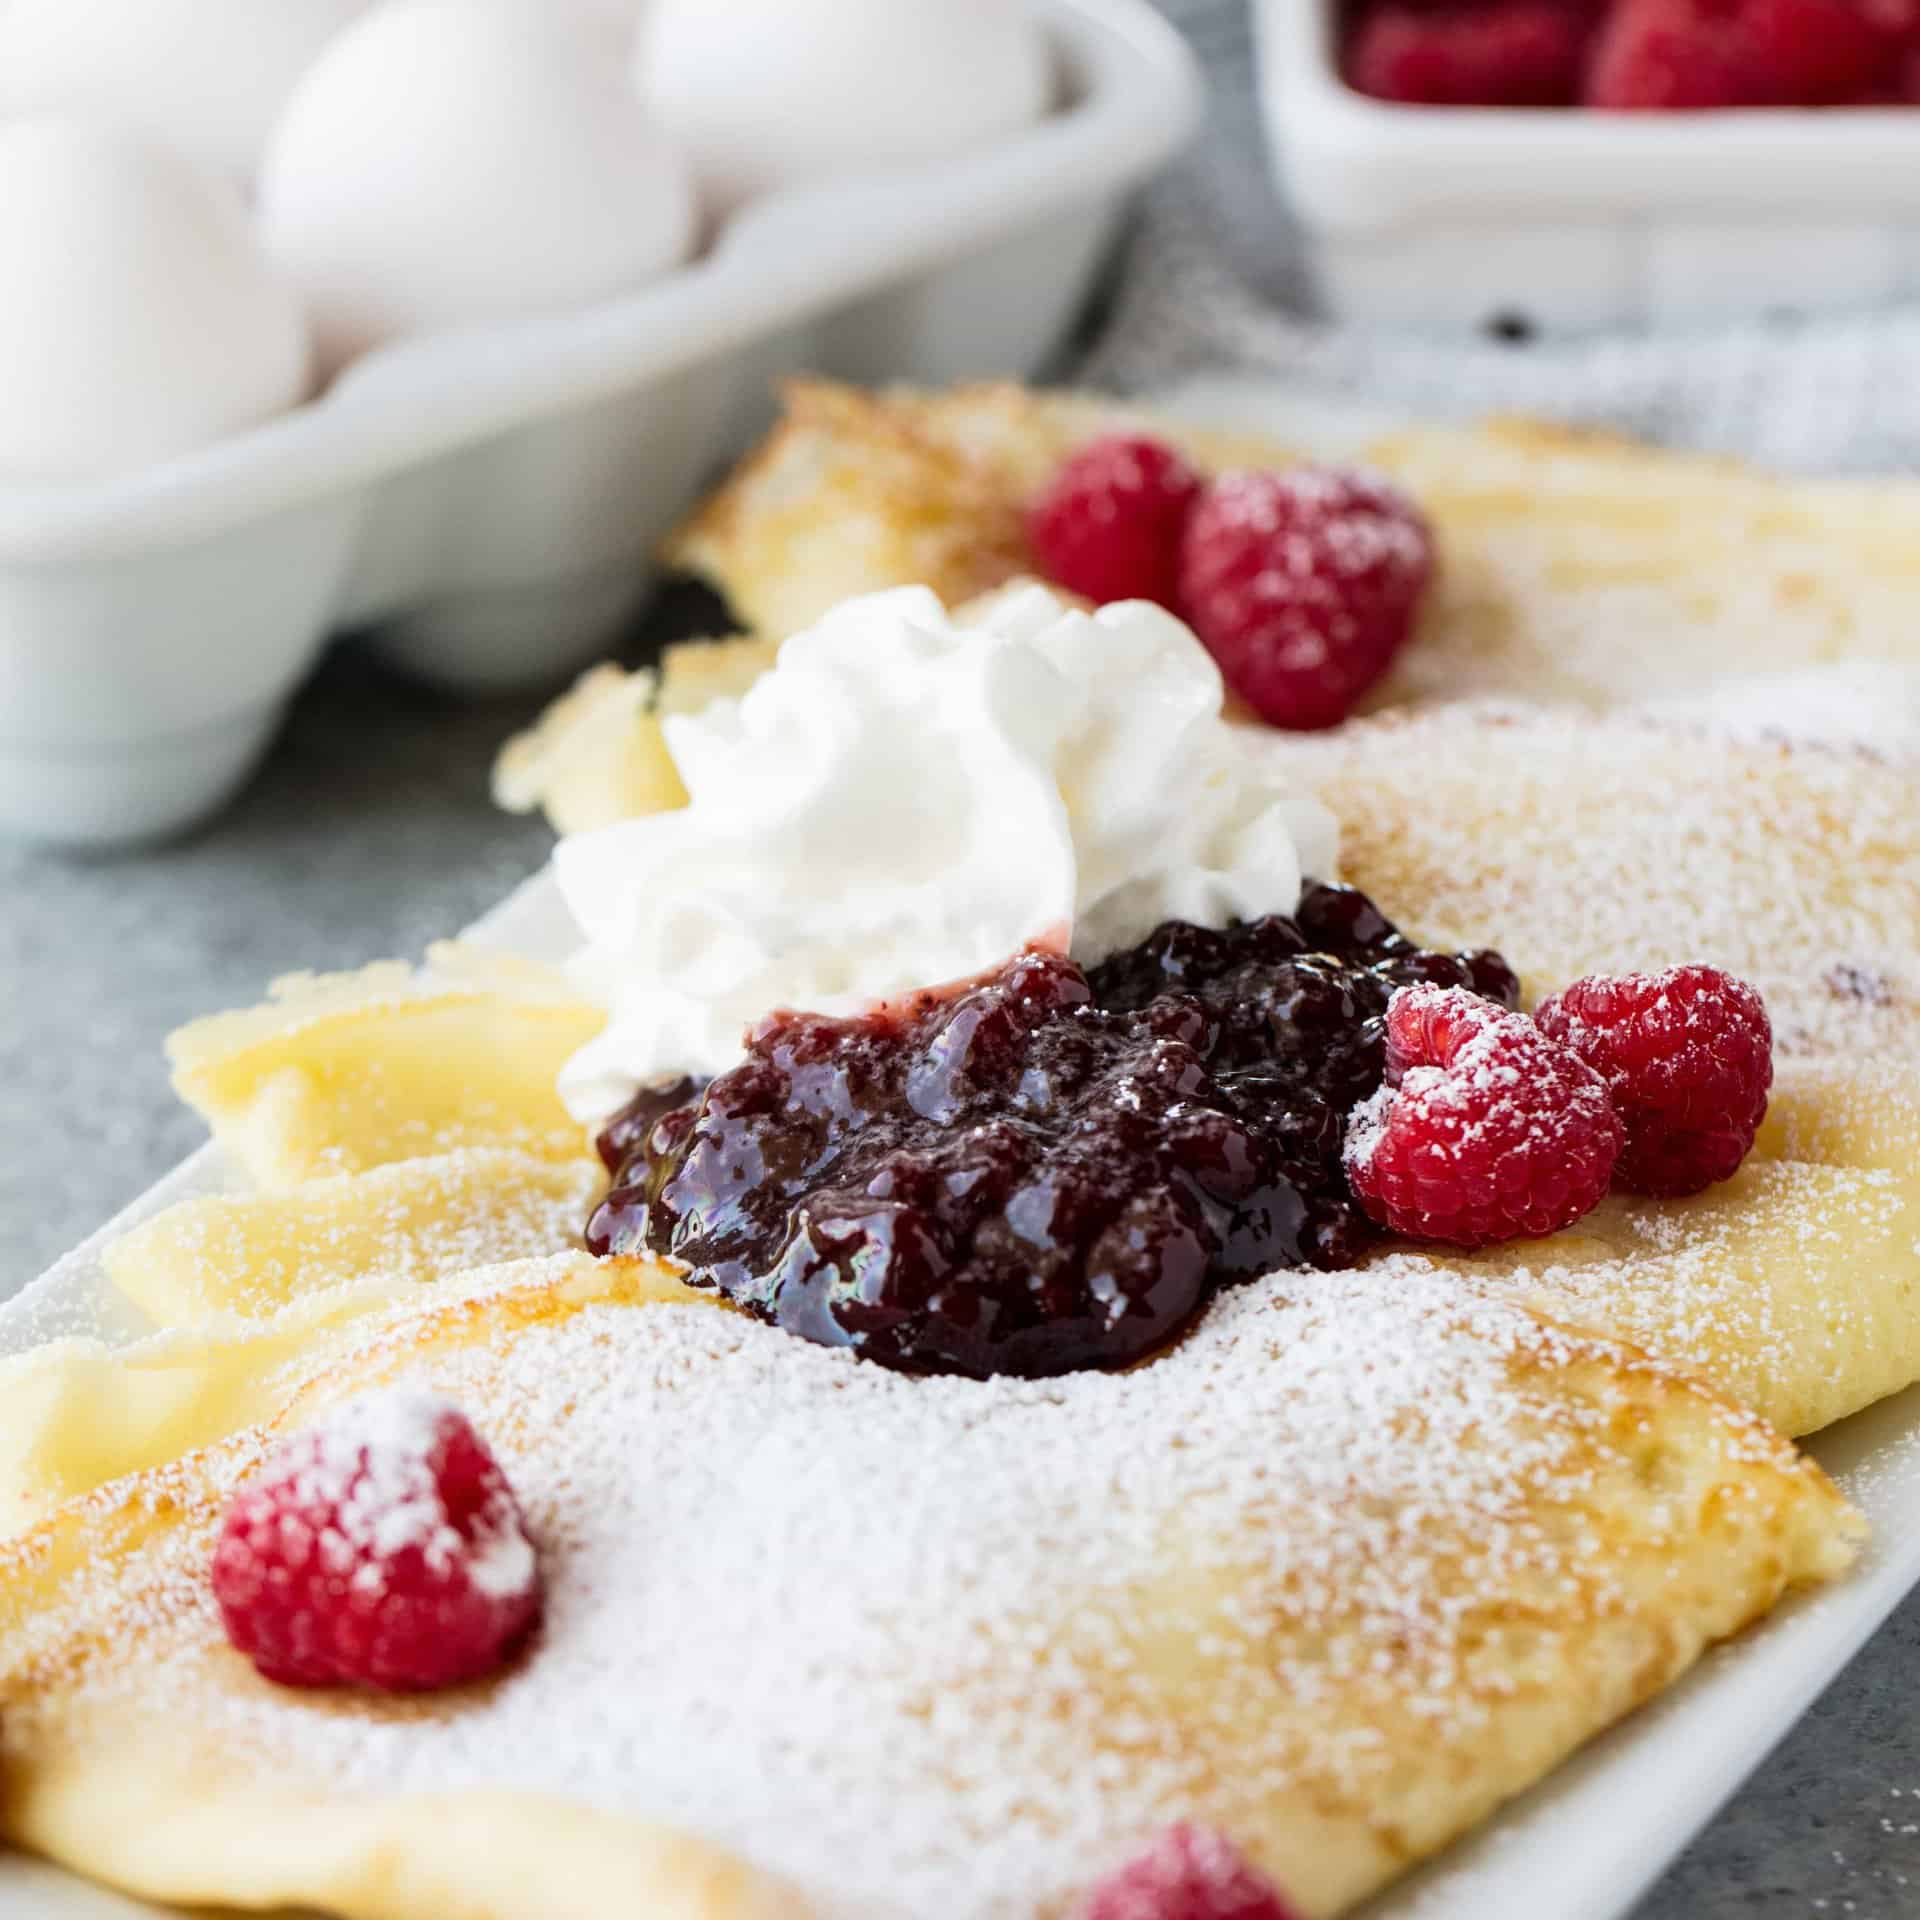 Fluffy Swedish Pancakes come together in minutes making it a fun breakfast or brunch item that the whole family will love. Dust them with a little powdered sugar and serve with fresh fruit, jam, and whipped cream!